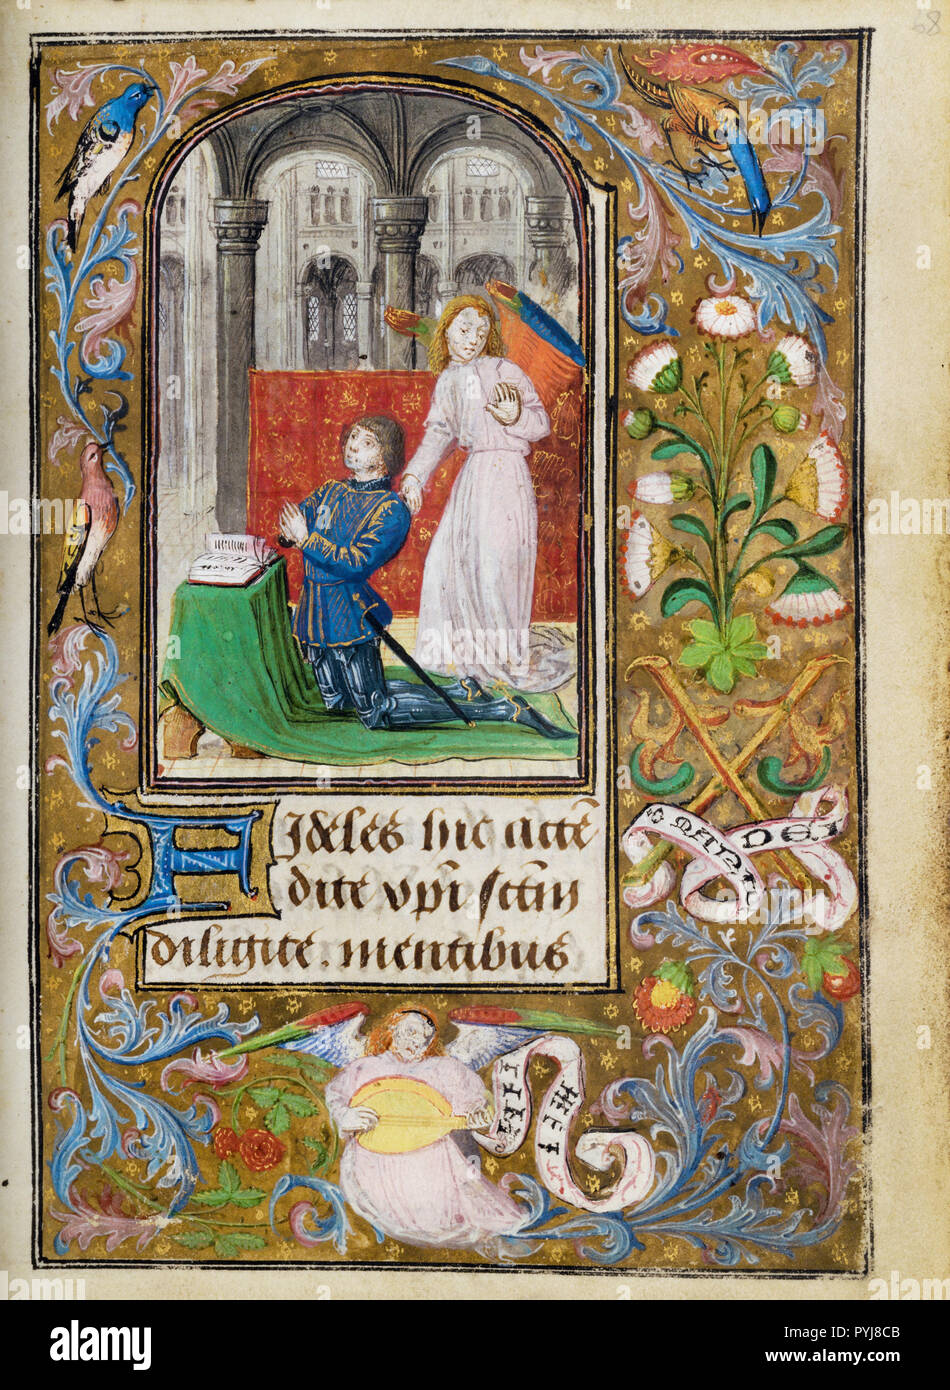 Lieven van Lathem, Charles the Bold Presented by an Angel, , Circa 1471 Tempera colors, gold leaf, gold, silver, ink on parchment, The J. Paul Getty Museum, Los Angeles, USA. Stock Photo